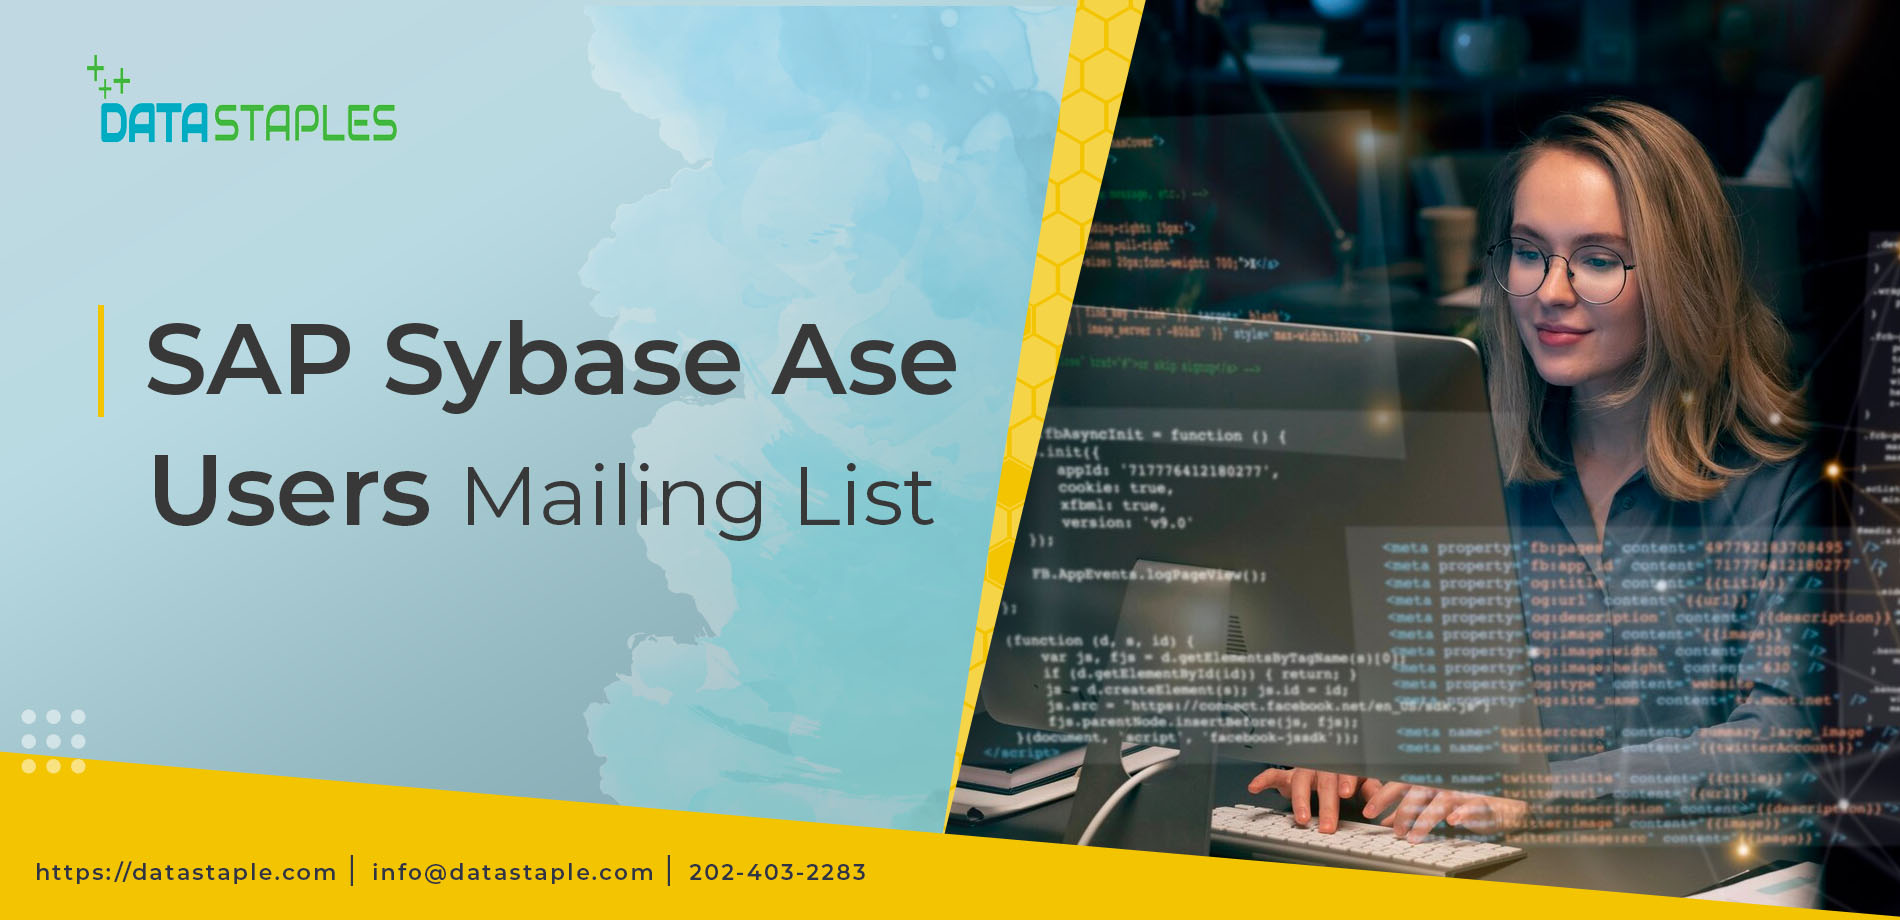 SAP Sybase ASE Users Mailing List | DataStaples